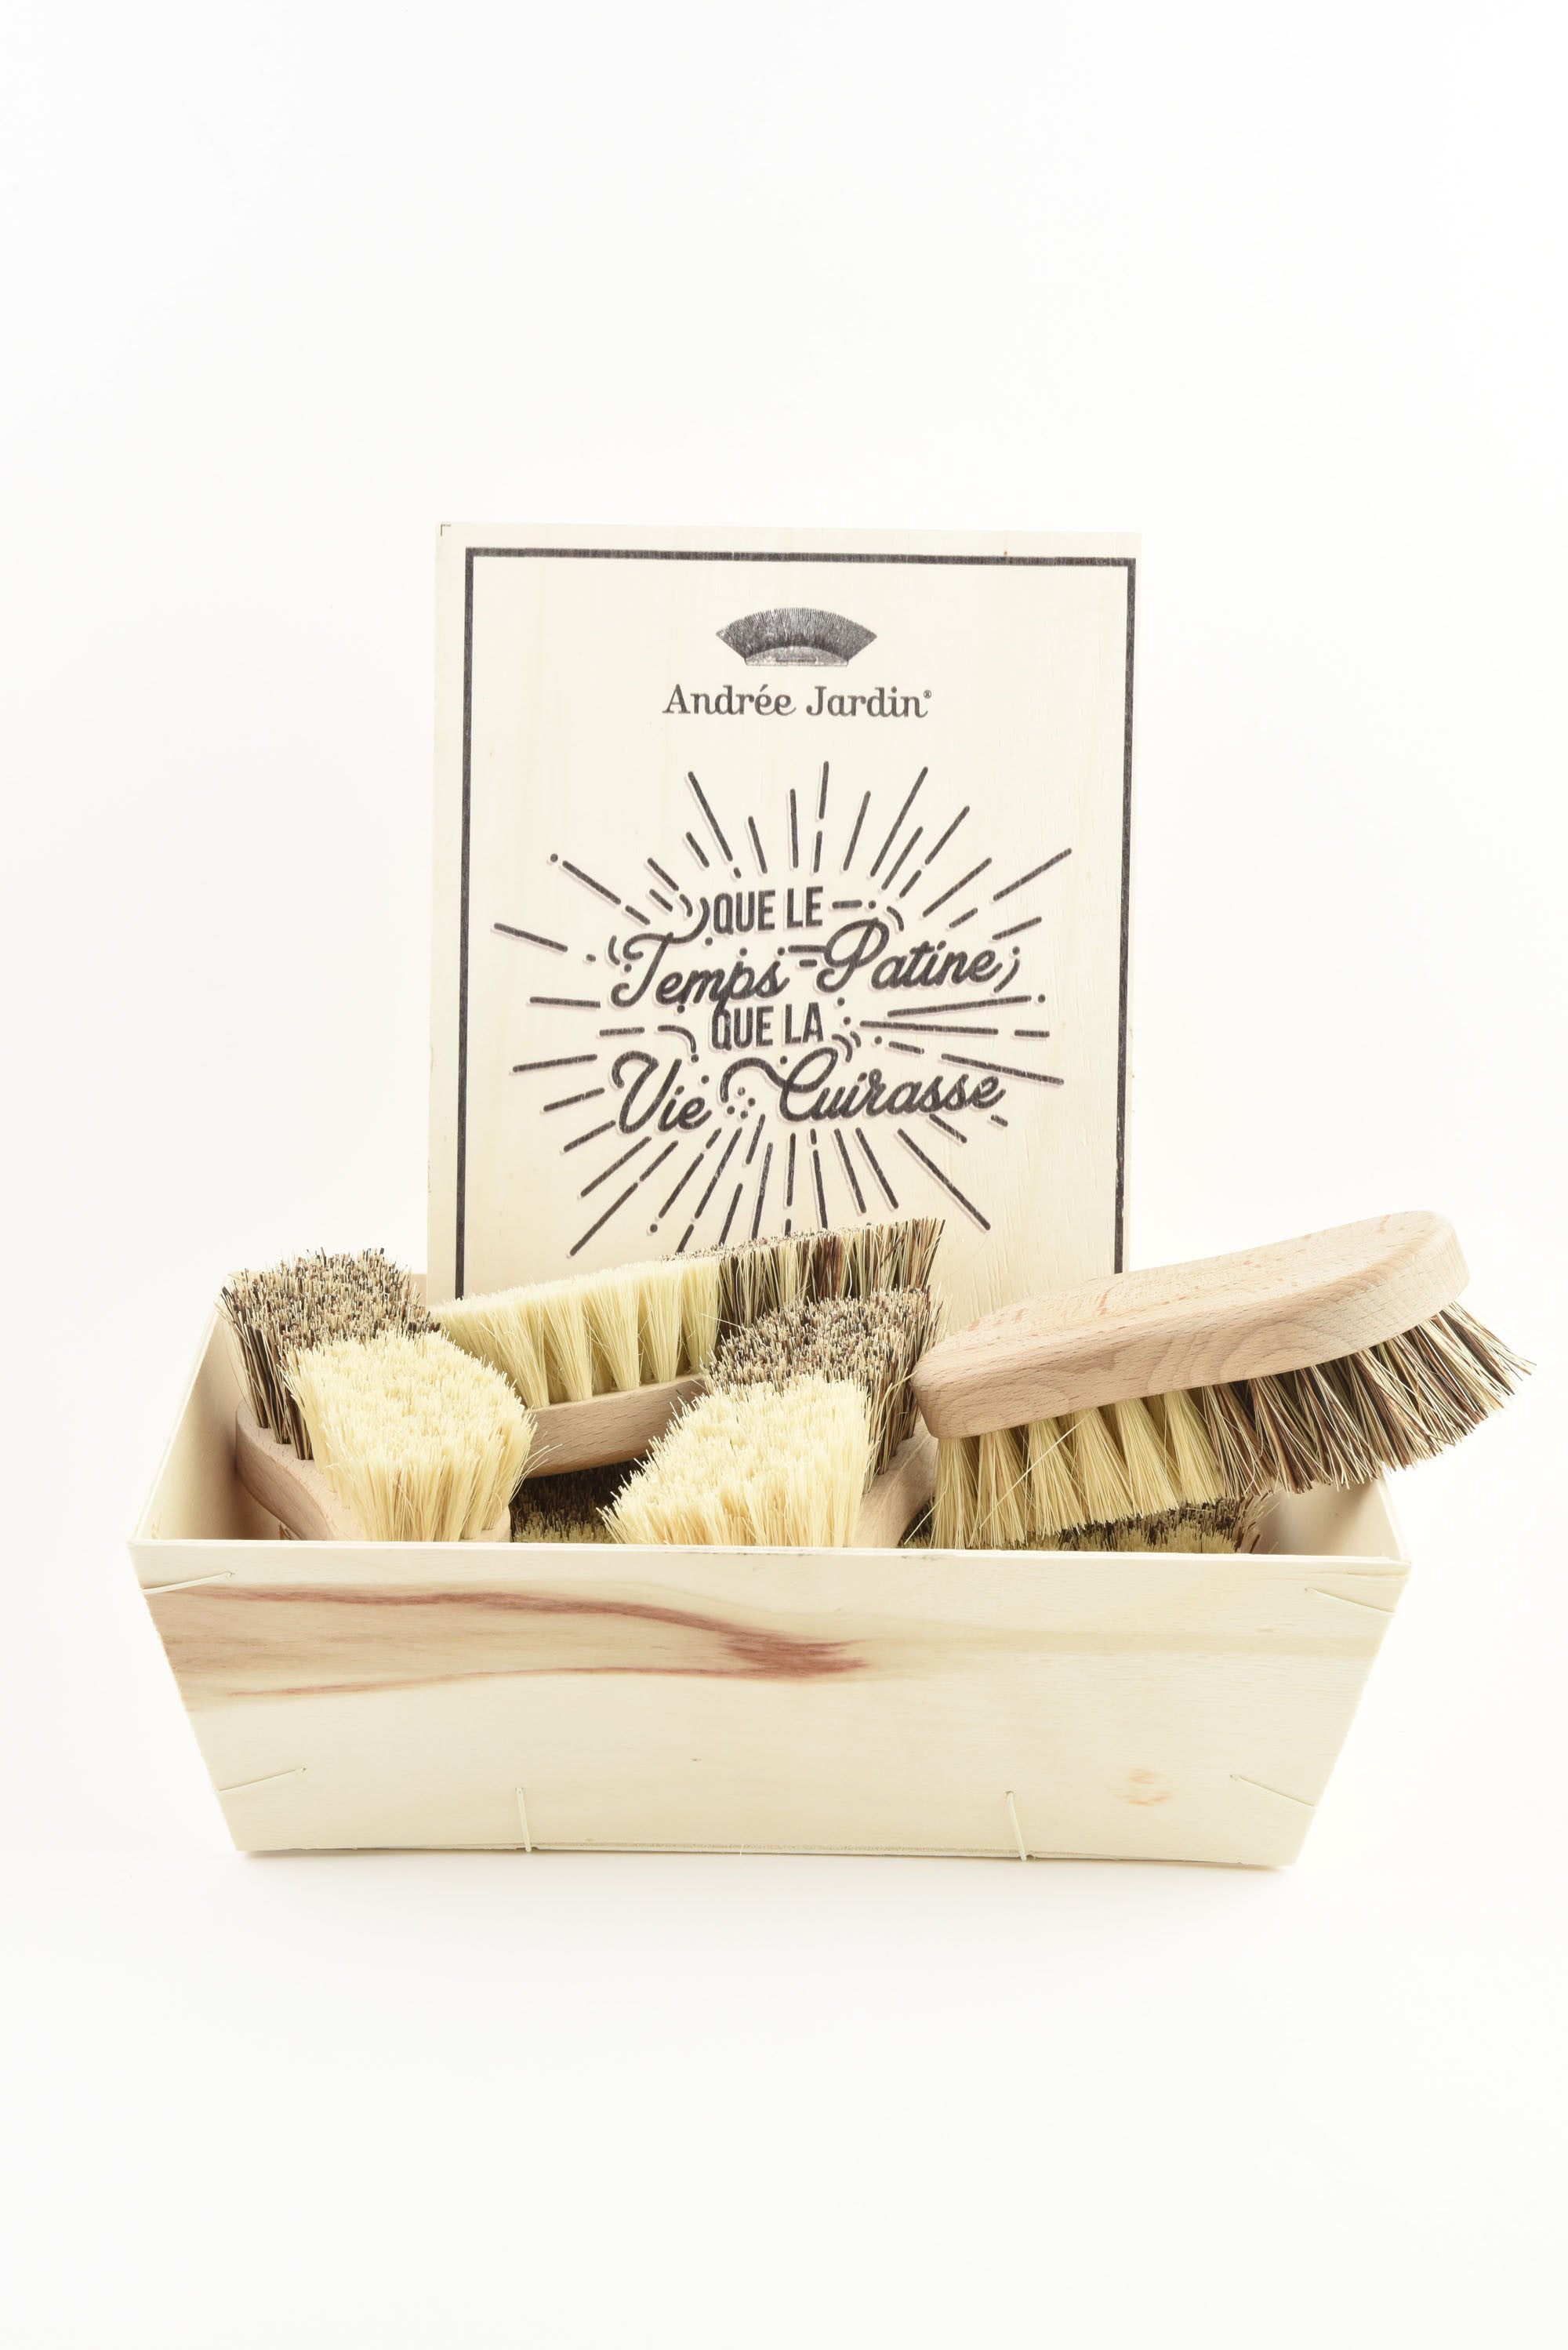 Andrée Jardin Tradition Set of 10 Vegetable Brushes in Retail Display Box Utilities Andrée Jardin Andrée Jardin Brand_Andrée Jardin Home_Household Cleaning DSC2317